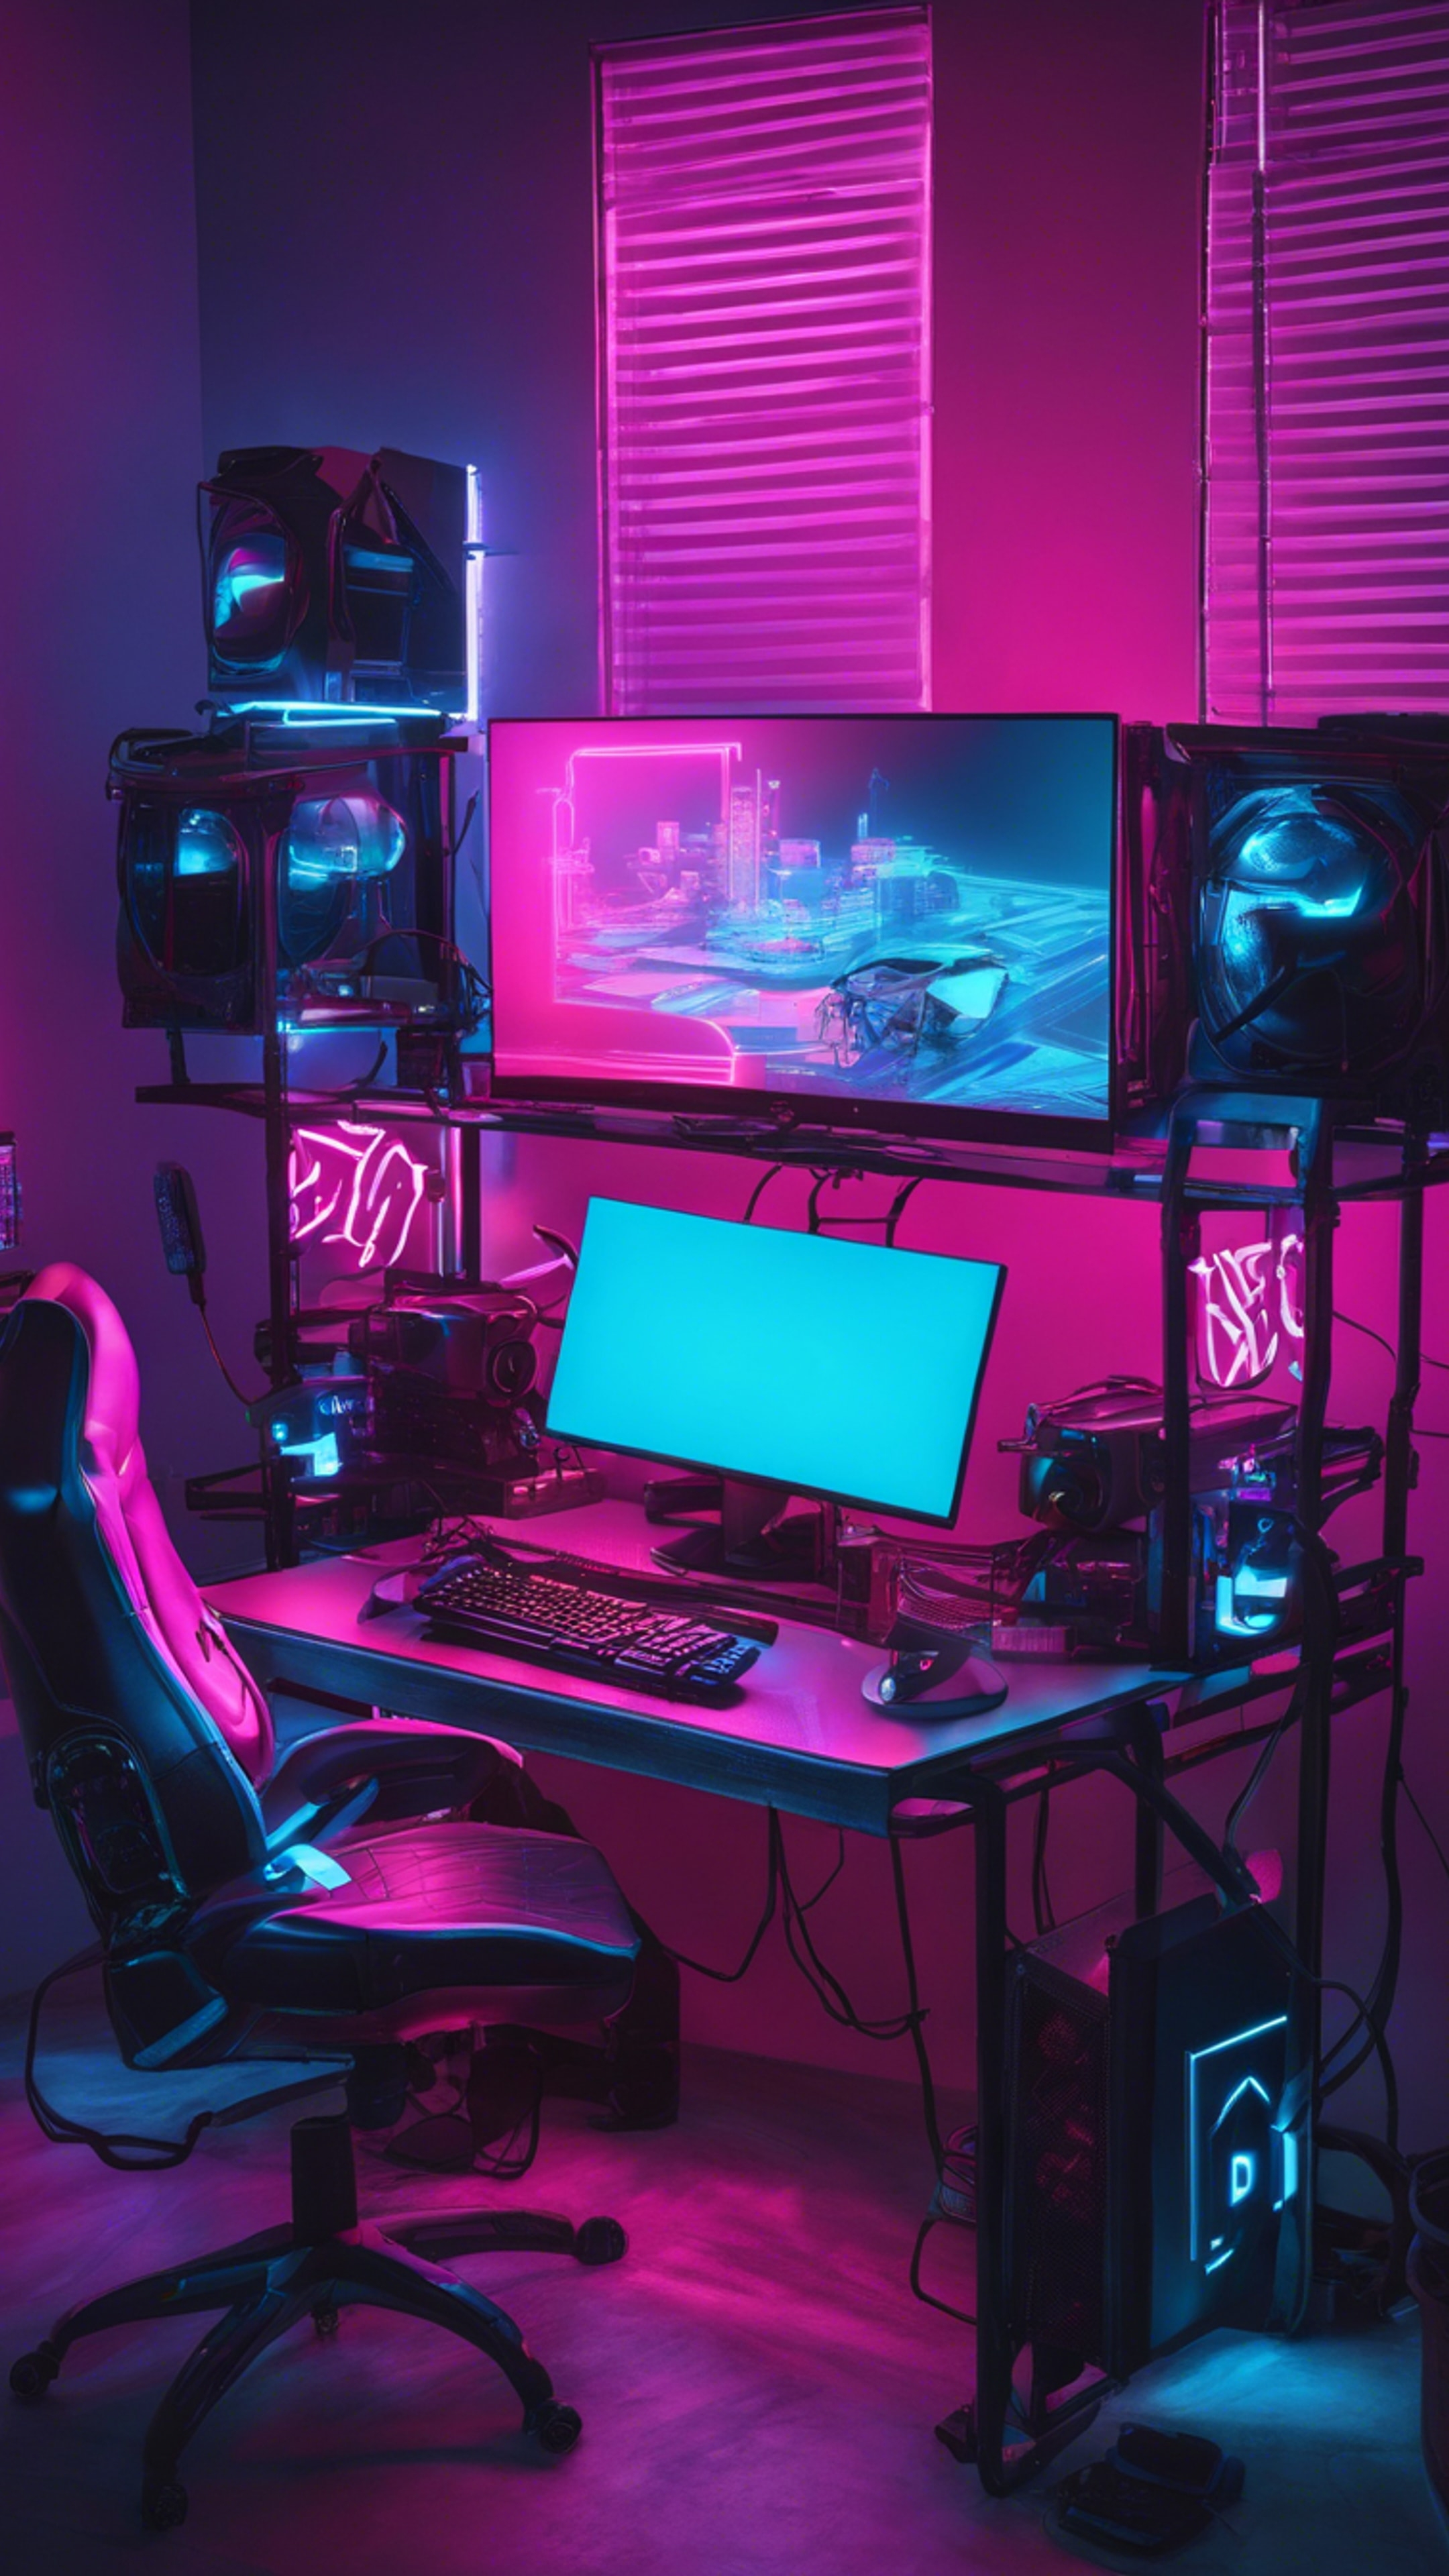 A neon blue gaming setup with a high-end PC, LED keyboard and a gaming monitor. Дэлгэцийн зураг[173ea11d79a5456c932c]